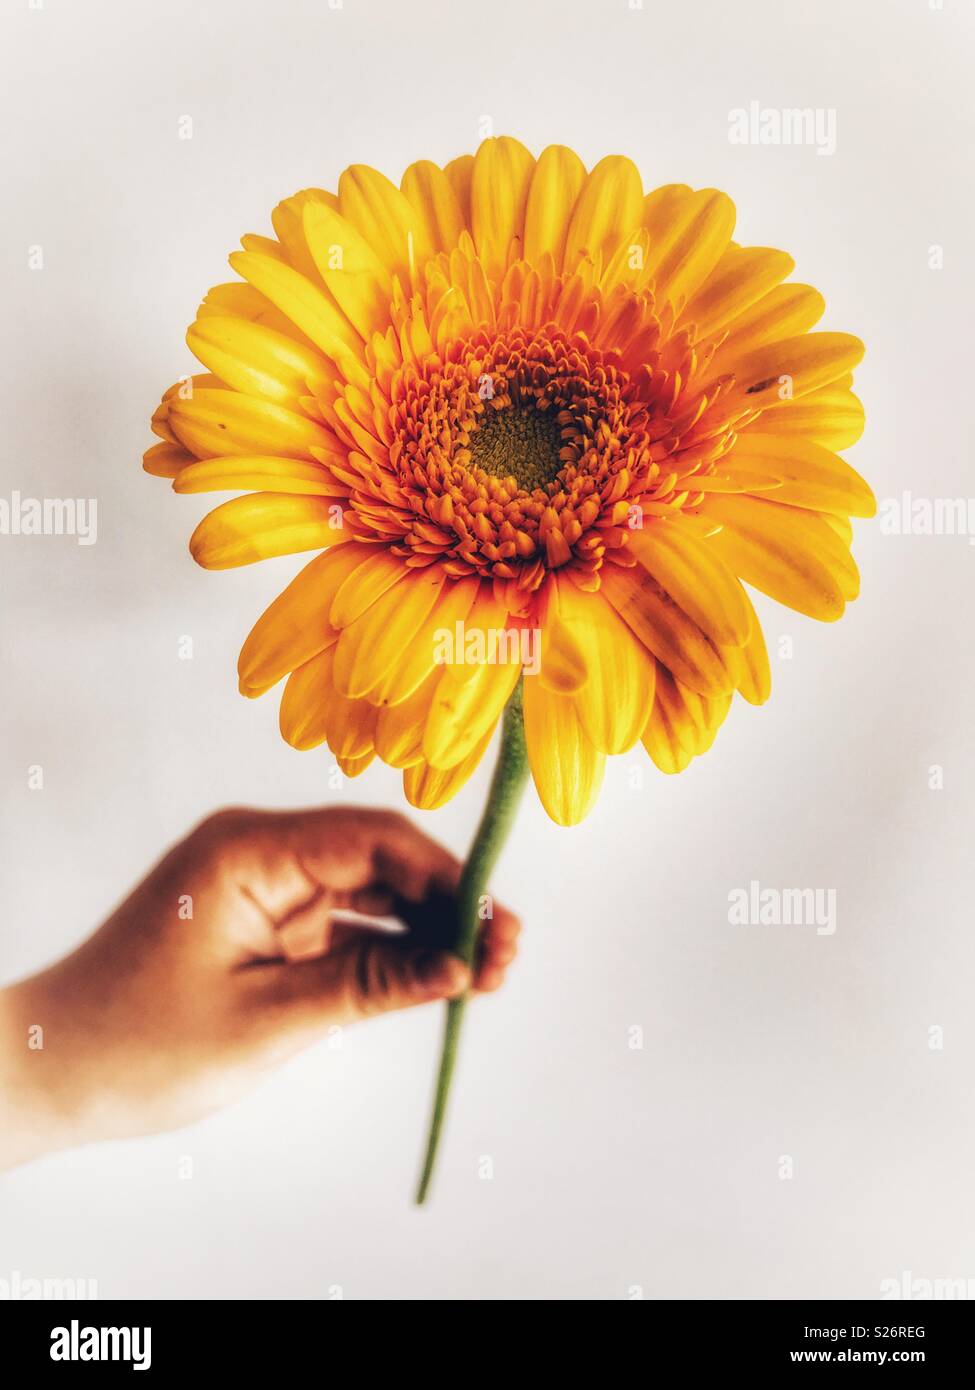 Woman holding a single, yellow, gerbera daisy in her hand, against a plain background, close-up Stock Photo